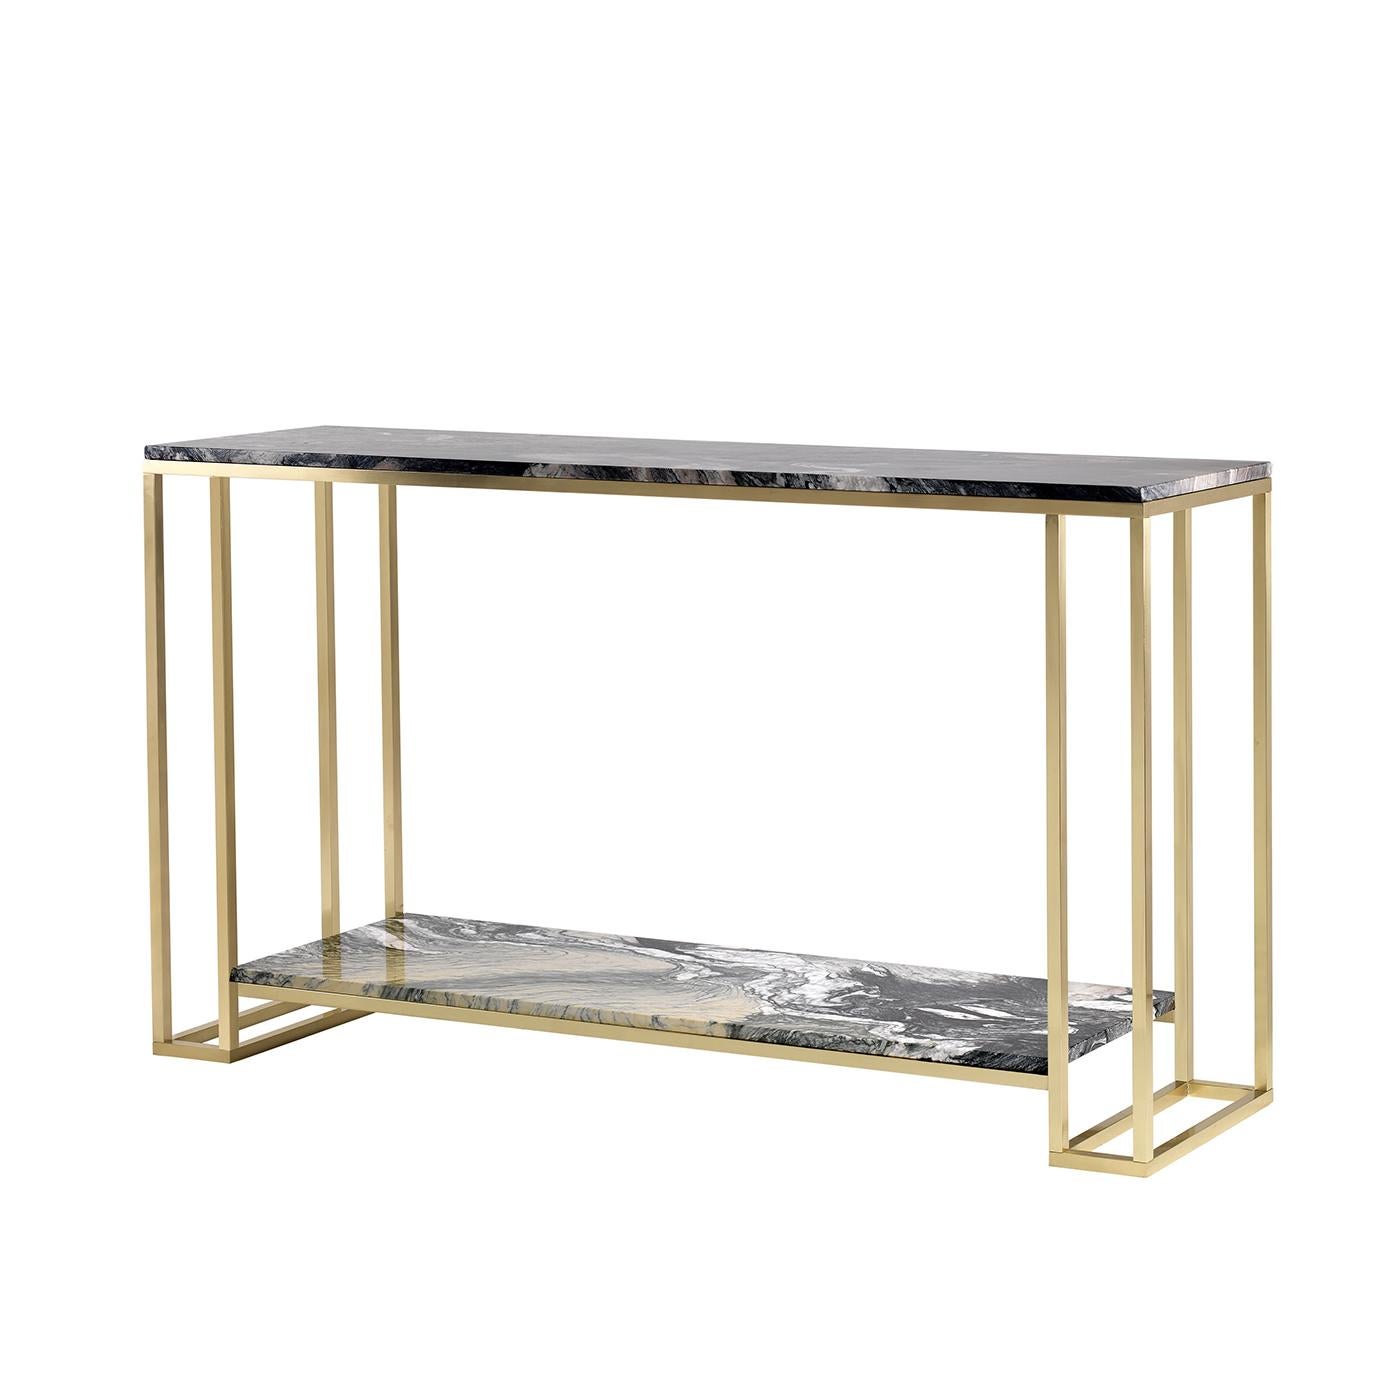 The Simply Console Table is a celebration of Rosso Luana Verde marble, with swirls of rose and purple accented by swatches of green on a gray background. On a geometric brass structure, the console is proudly contemporary but traditional in its